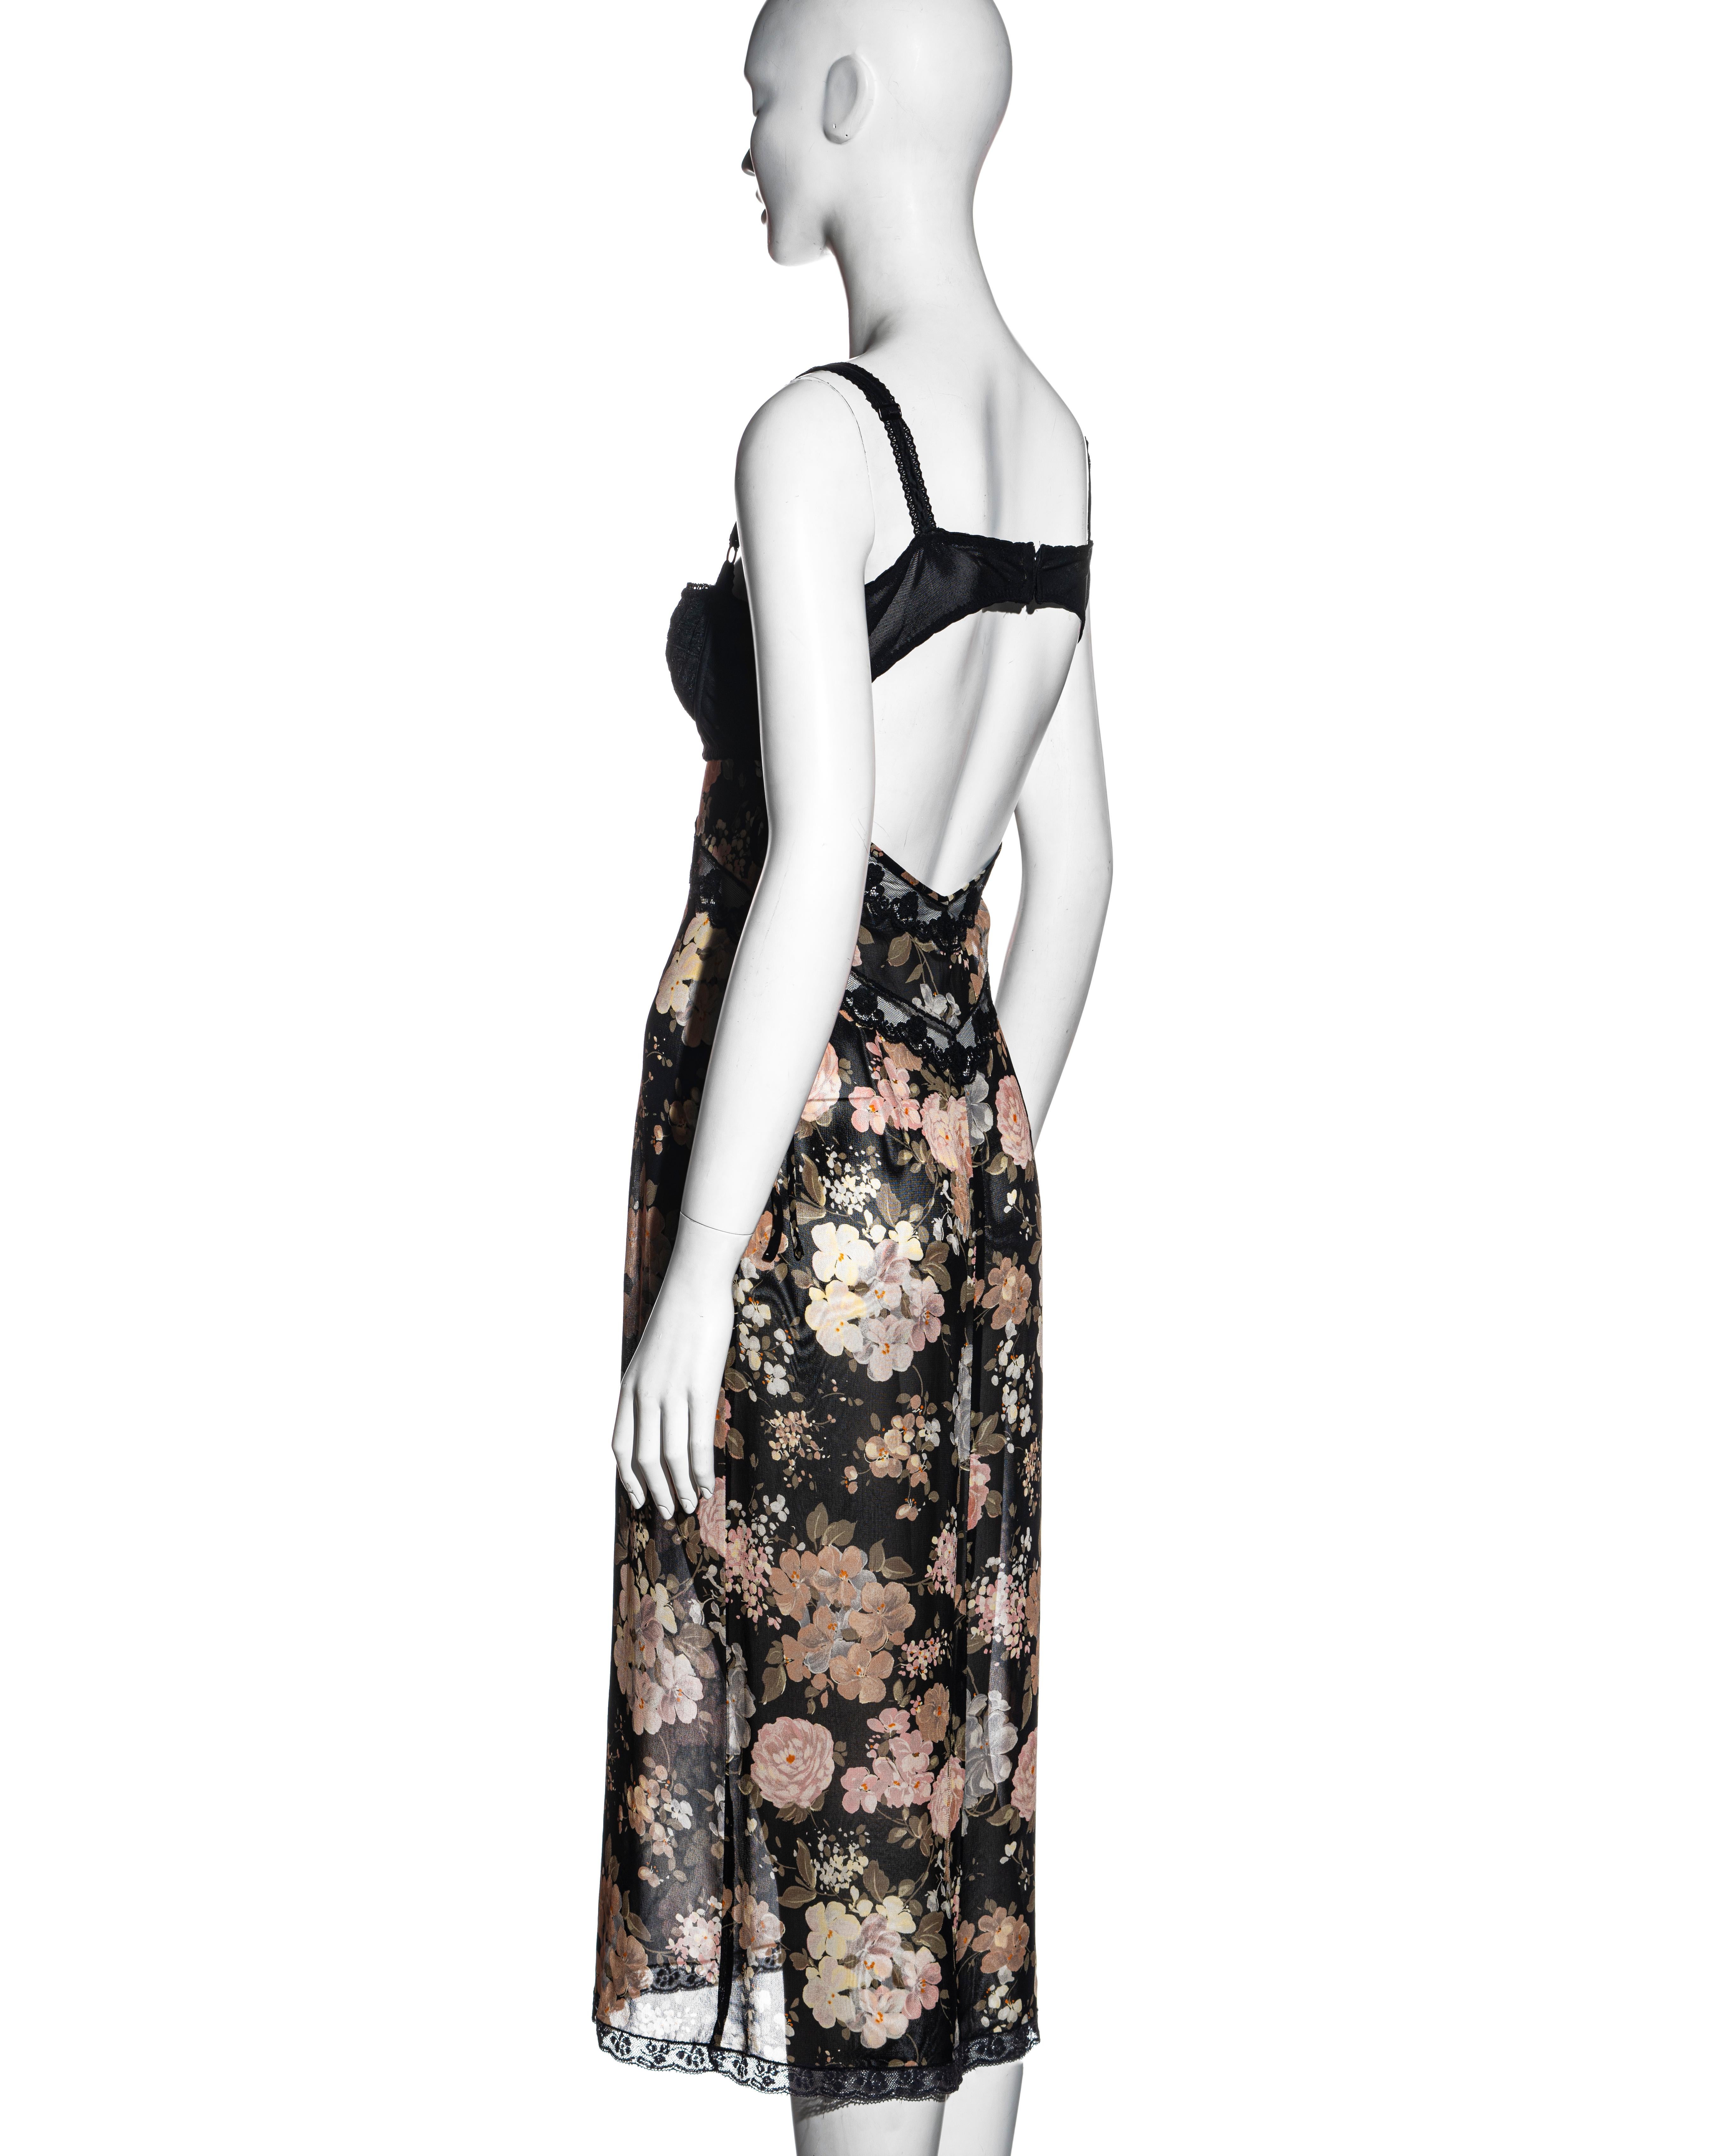 Dolce & Gabbana floral chiffon and lace evening slip dress, ss 1997 For Sale 1